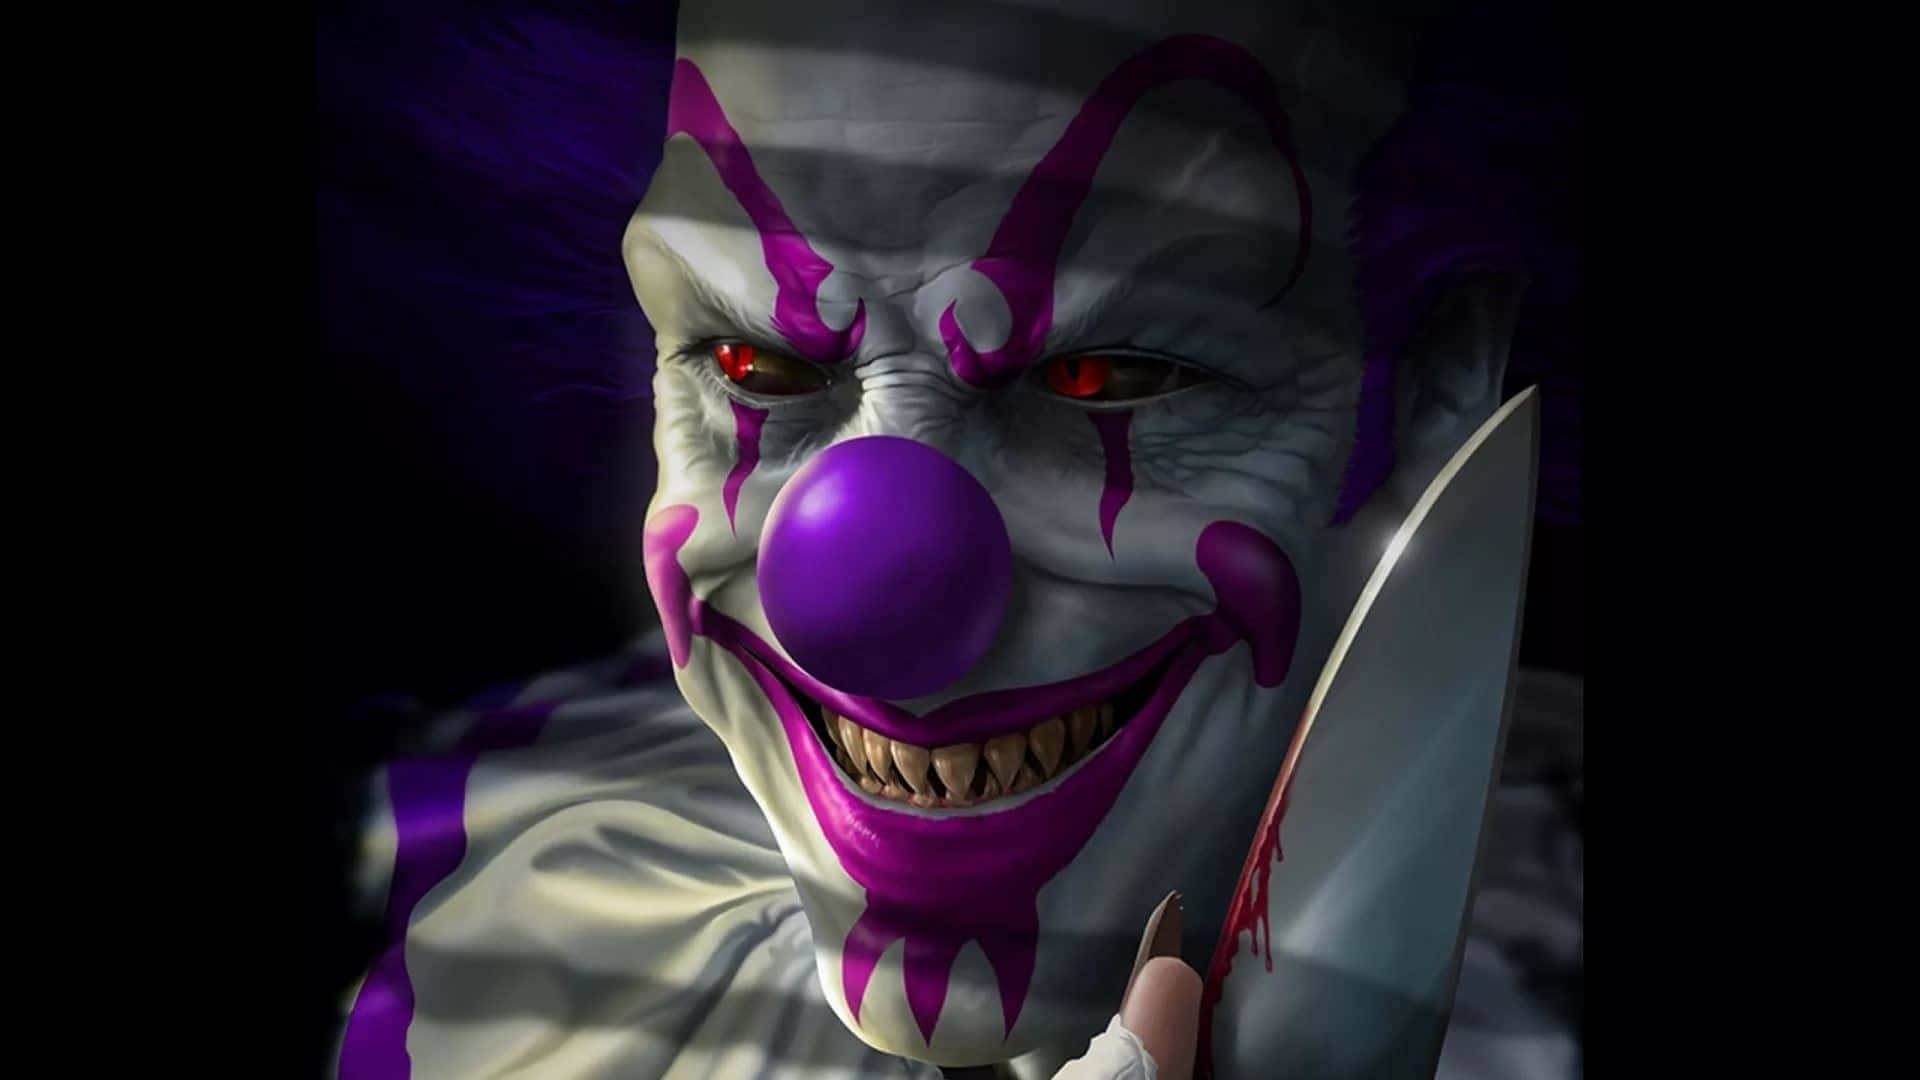 Smiling Clown in Colorful Costume on Dark Background